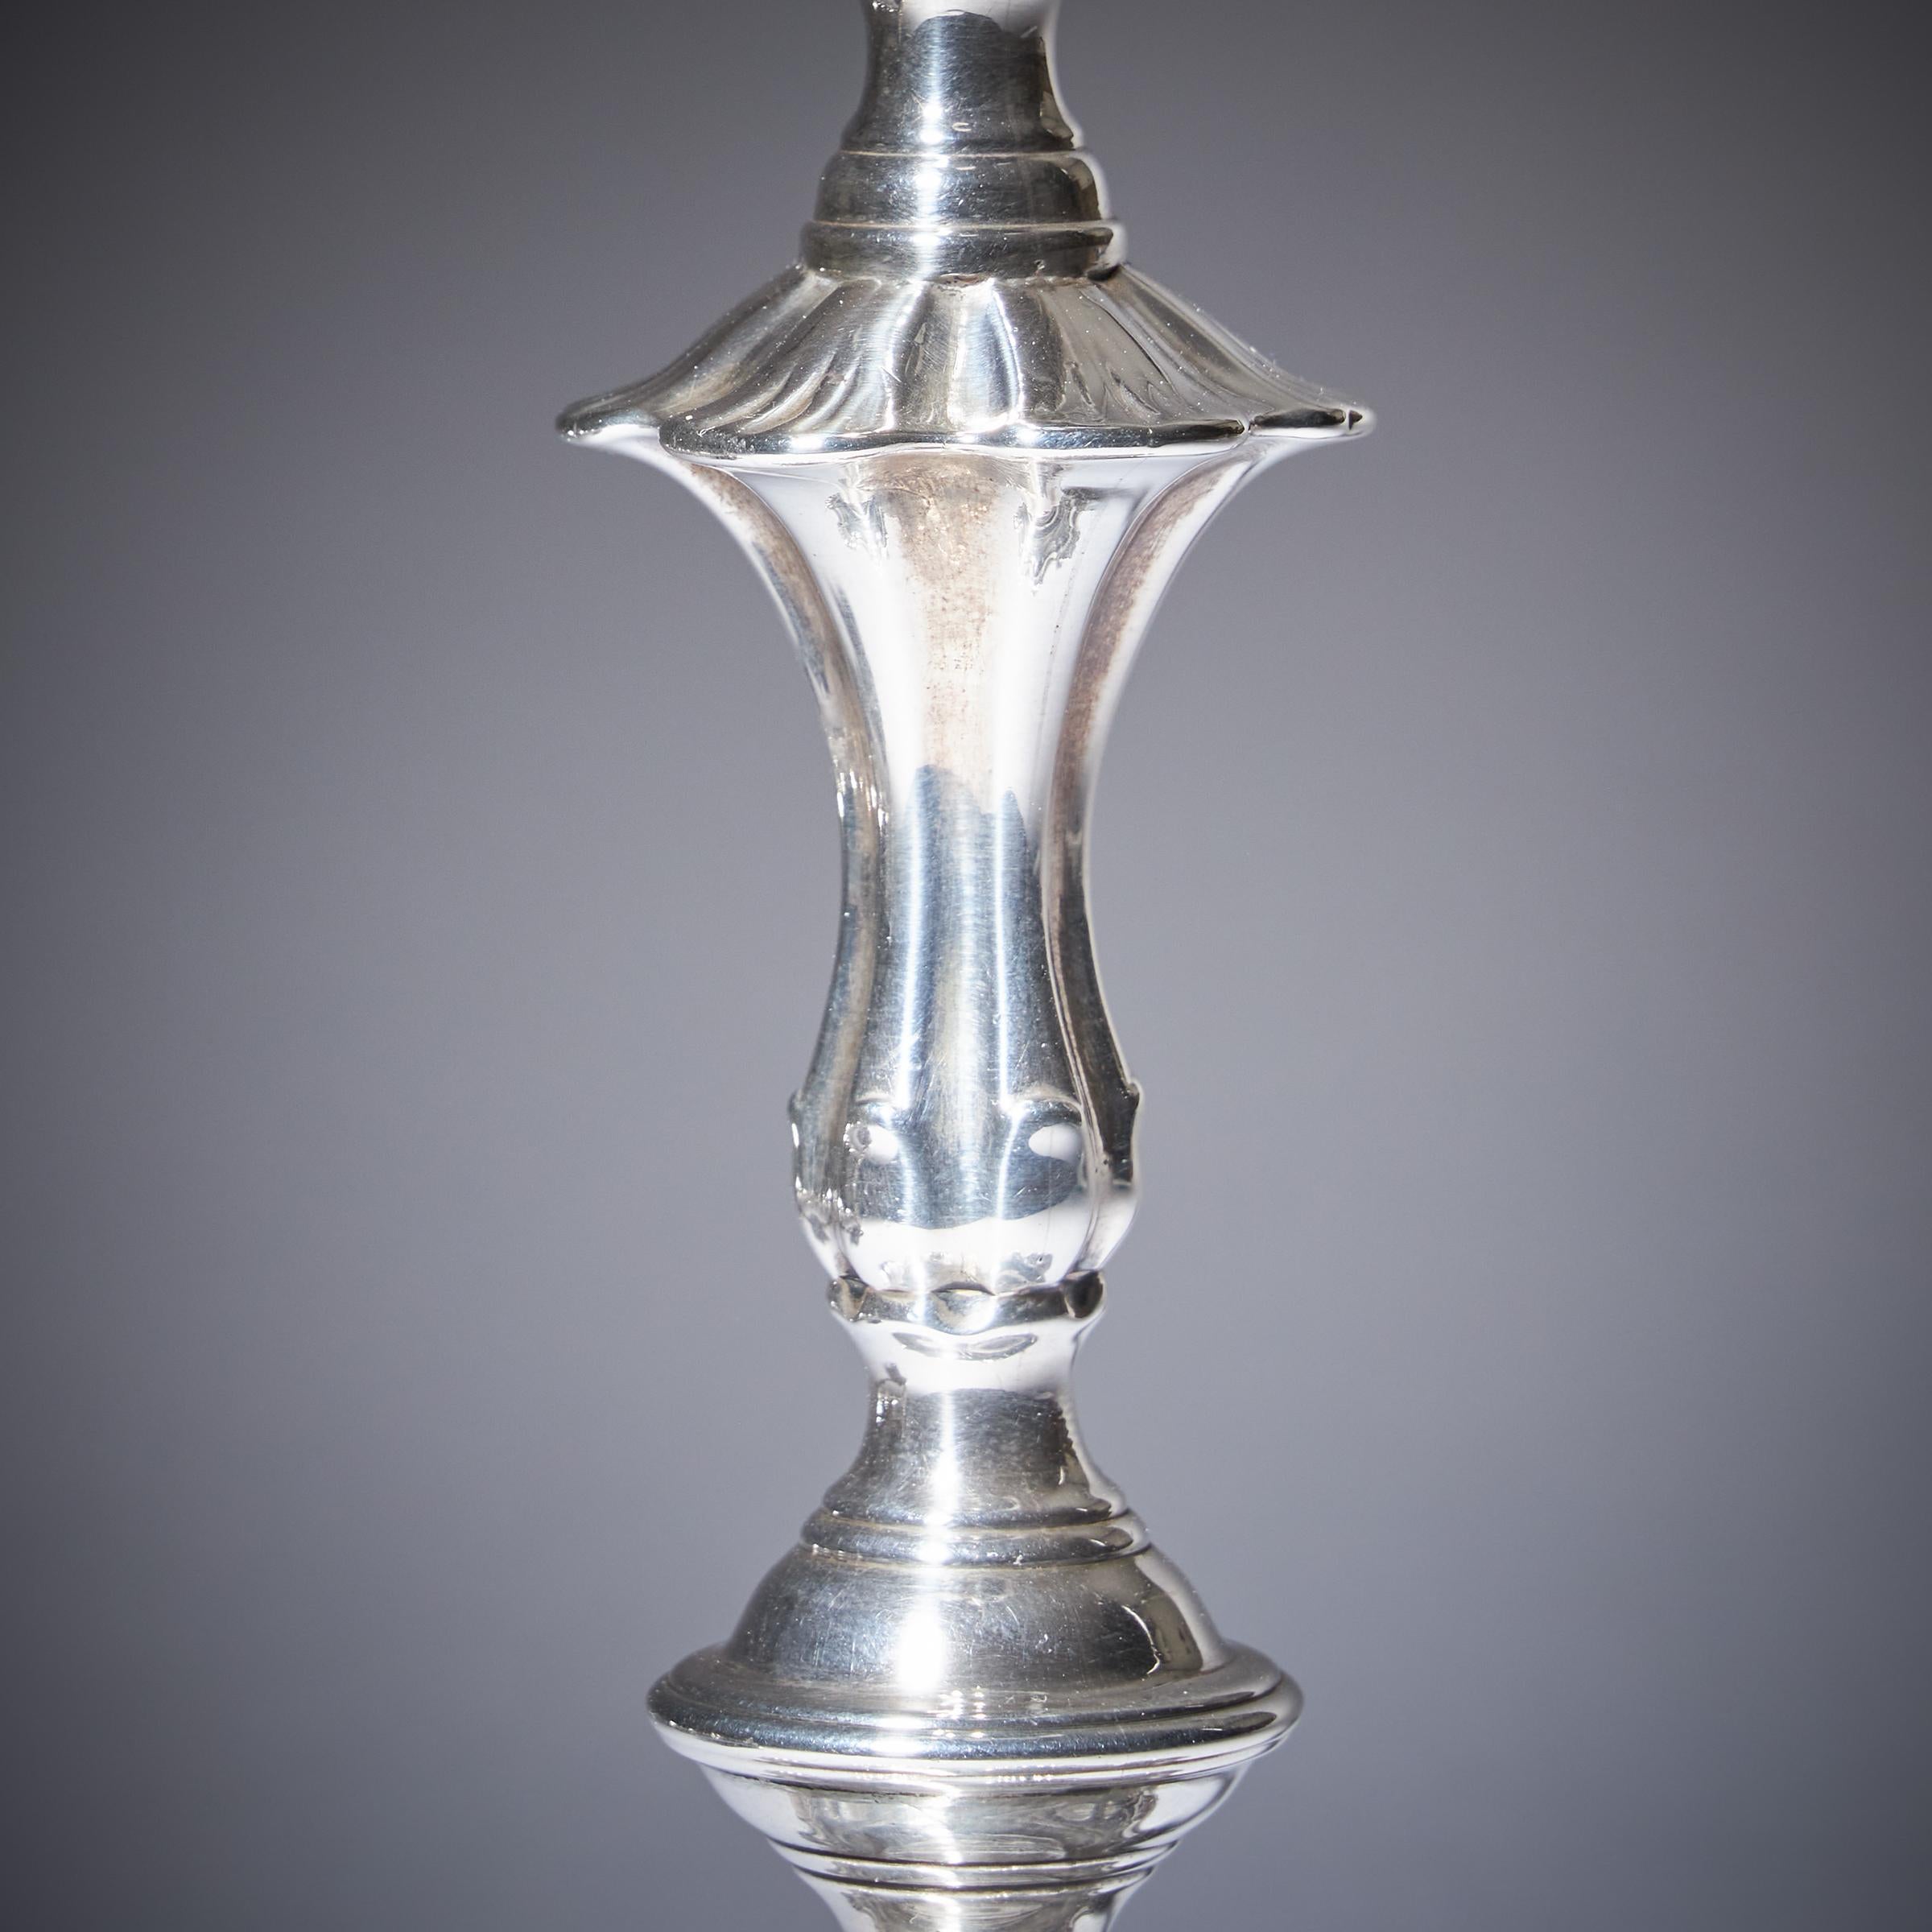 A Pair of 18th Century George II Silver Candlesticks by John Cafe, London 1751 9